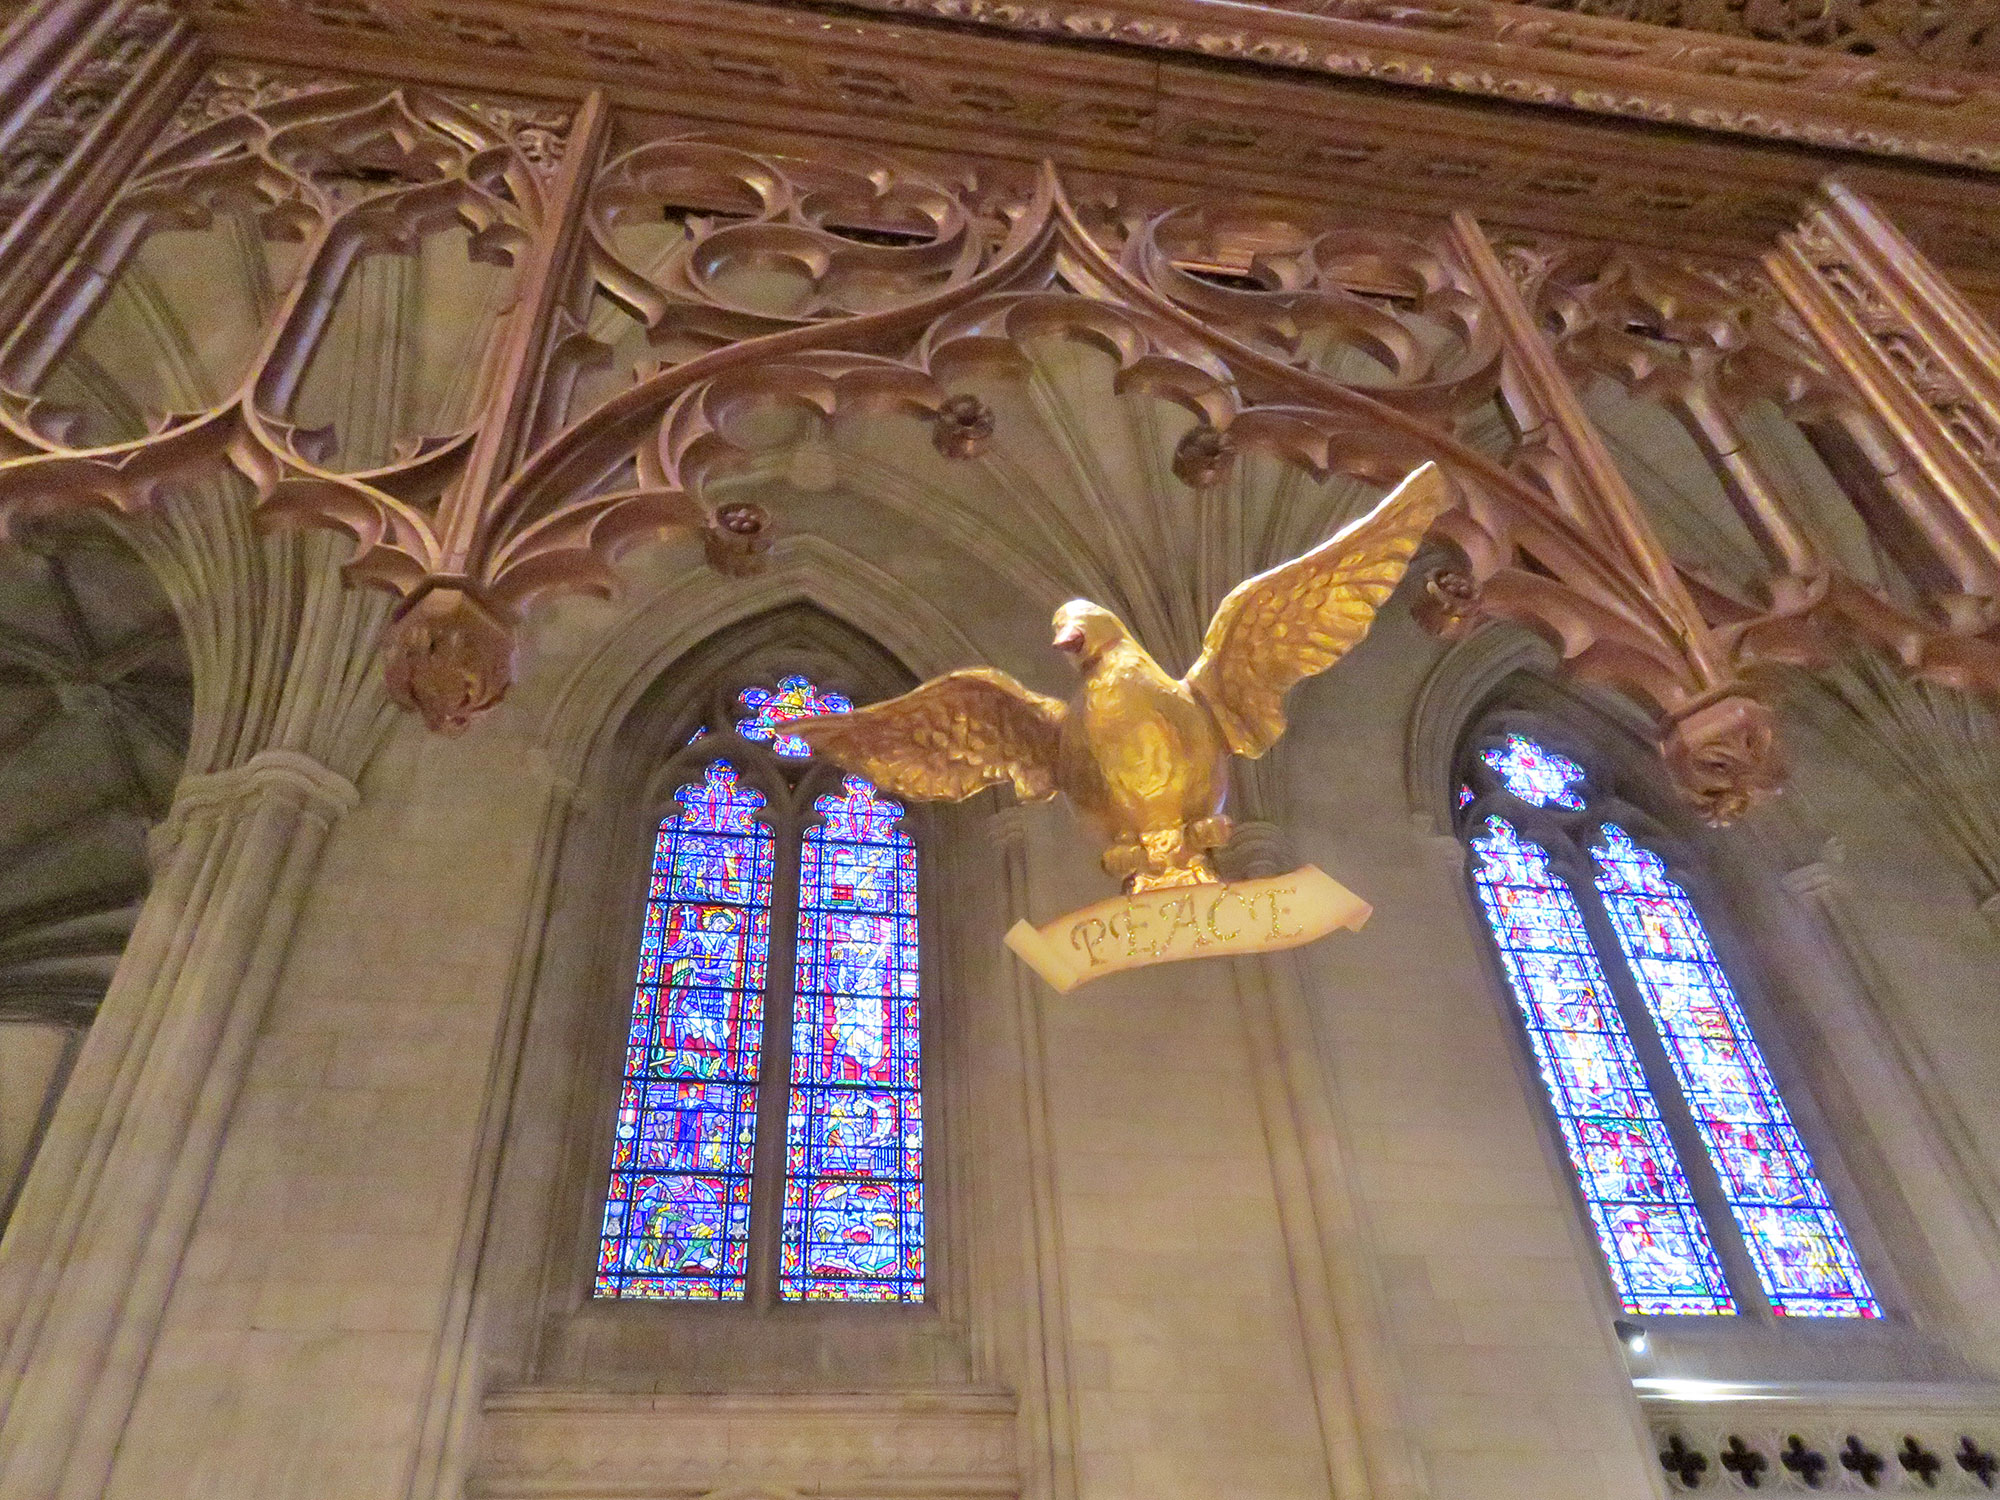 The peace dove at the Washington National Cathedral.